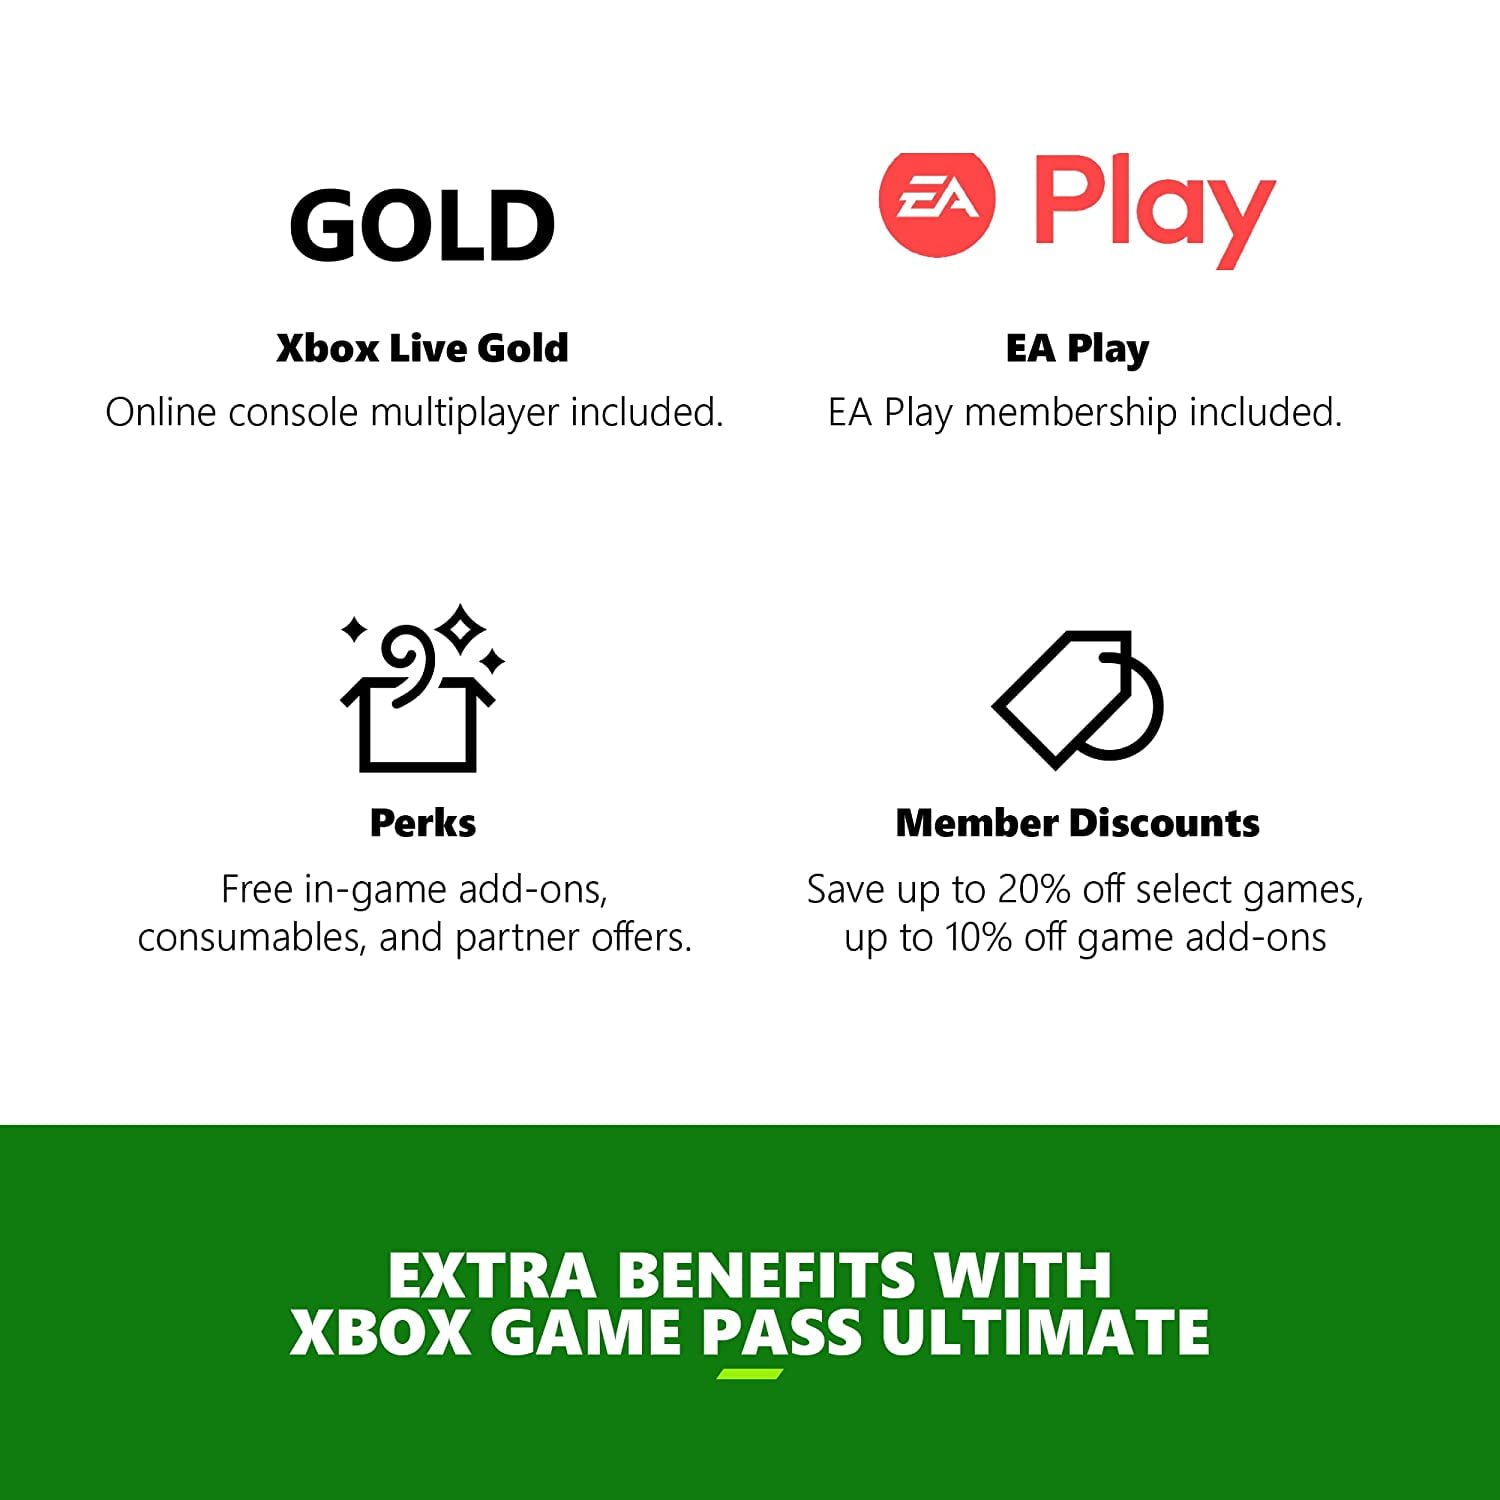 2-Pack Xbox Game Pass Ultimate: 3 Month Membership - Physical Card with  Microfiber Cleaning Cloth